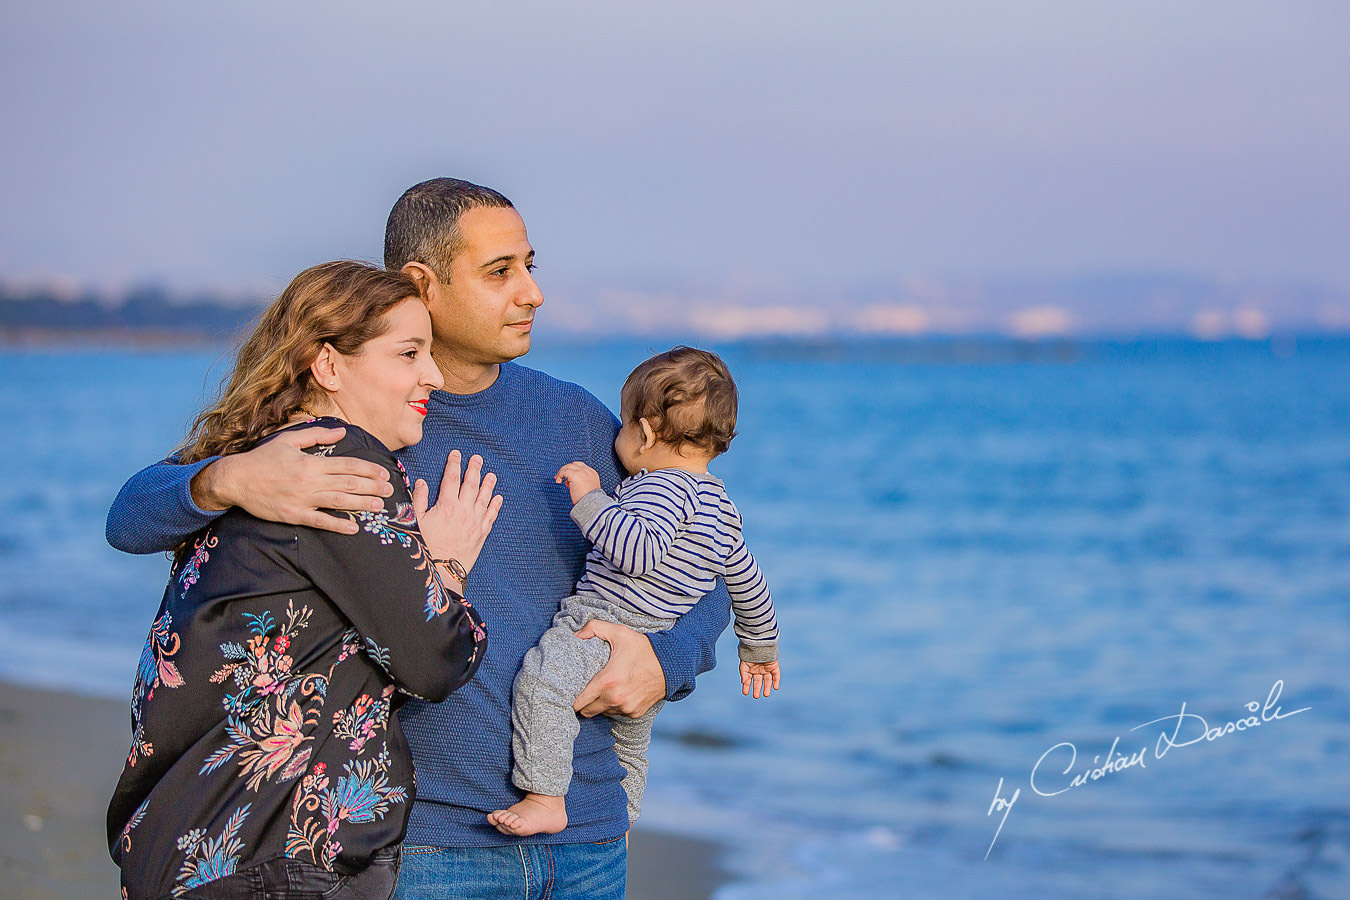 Family walking on a beach, moments captured by Cristian Dascalu during a beautiful Limassol family photography photo session.